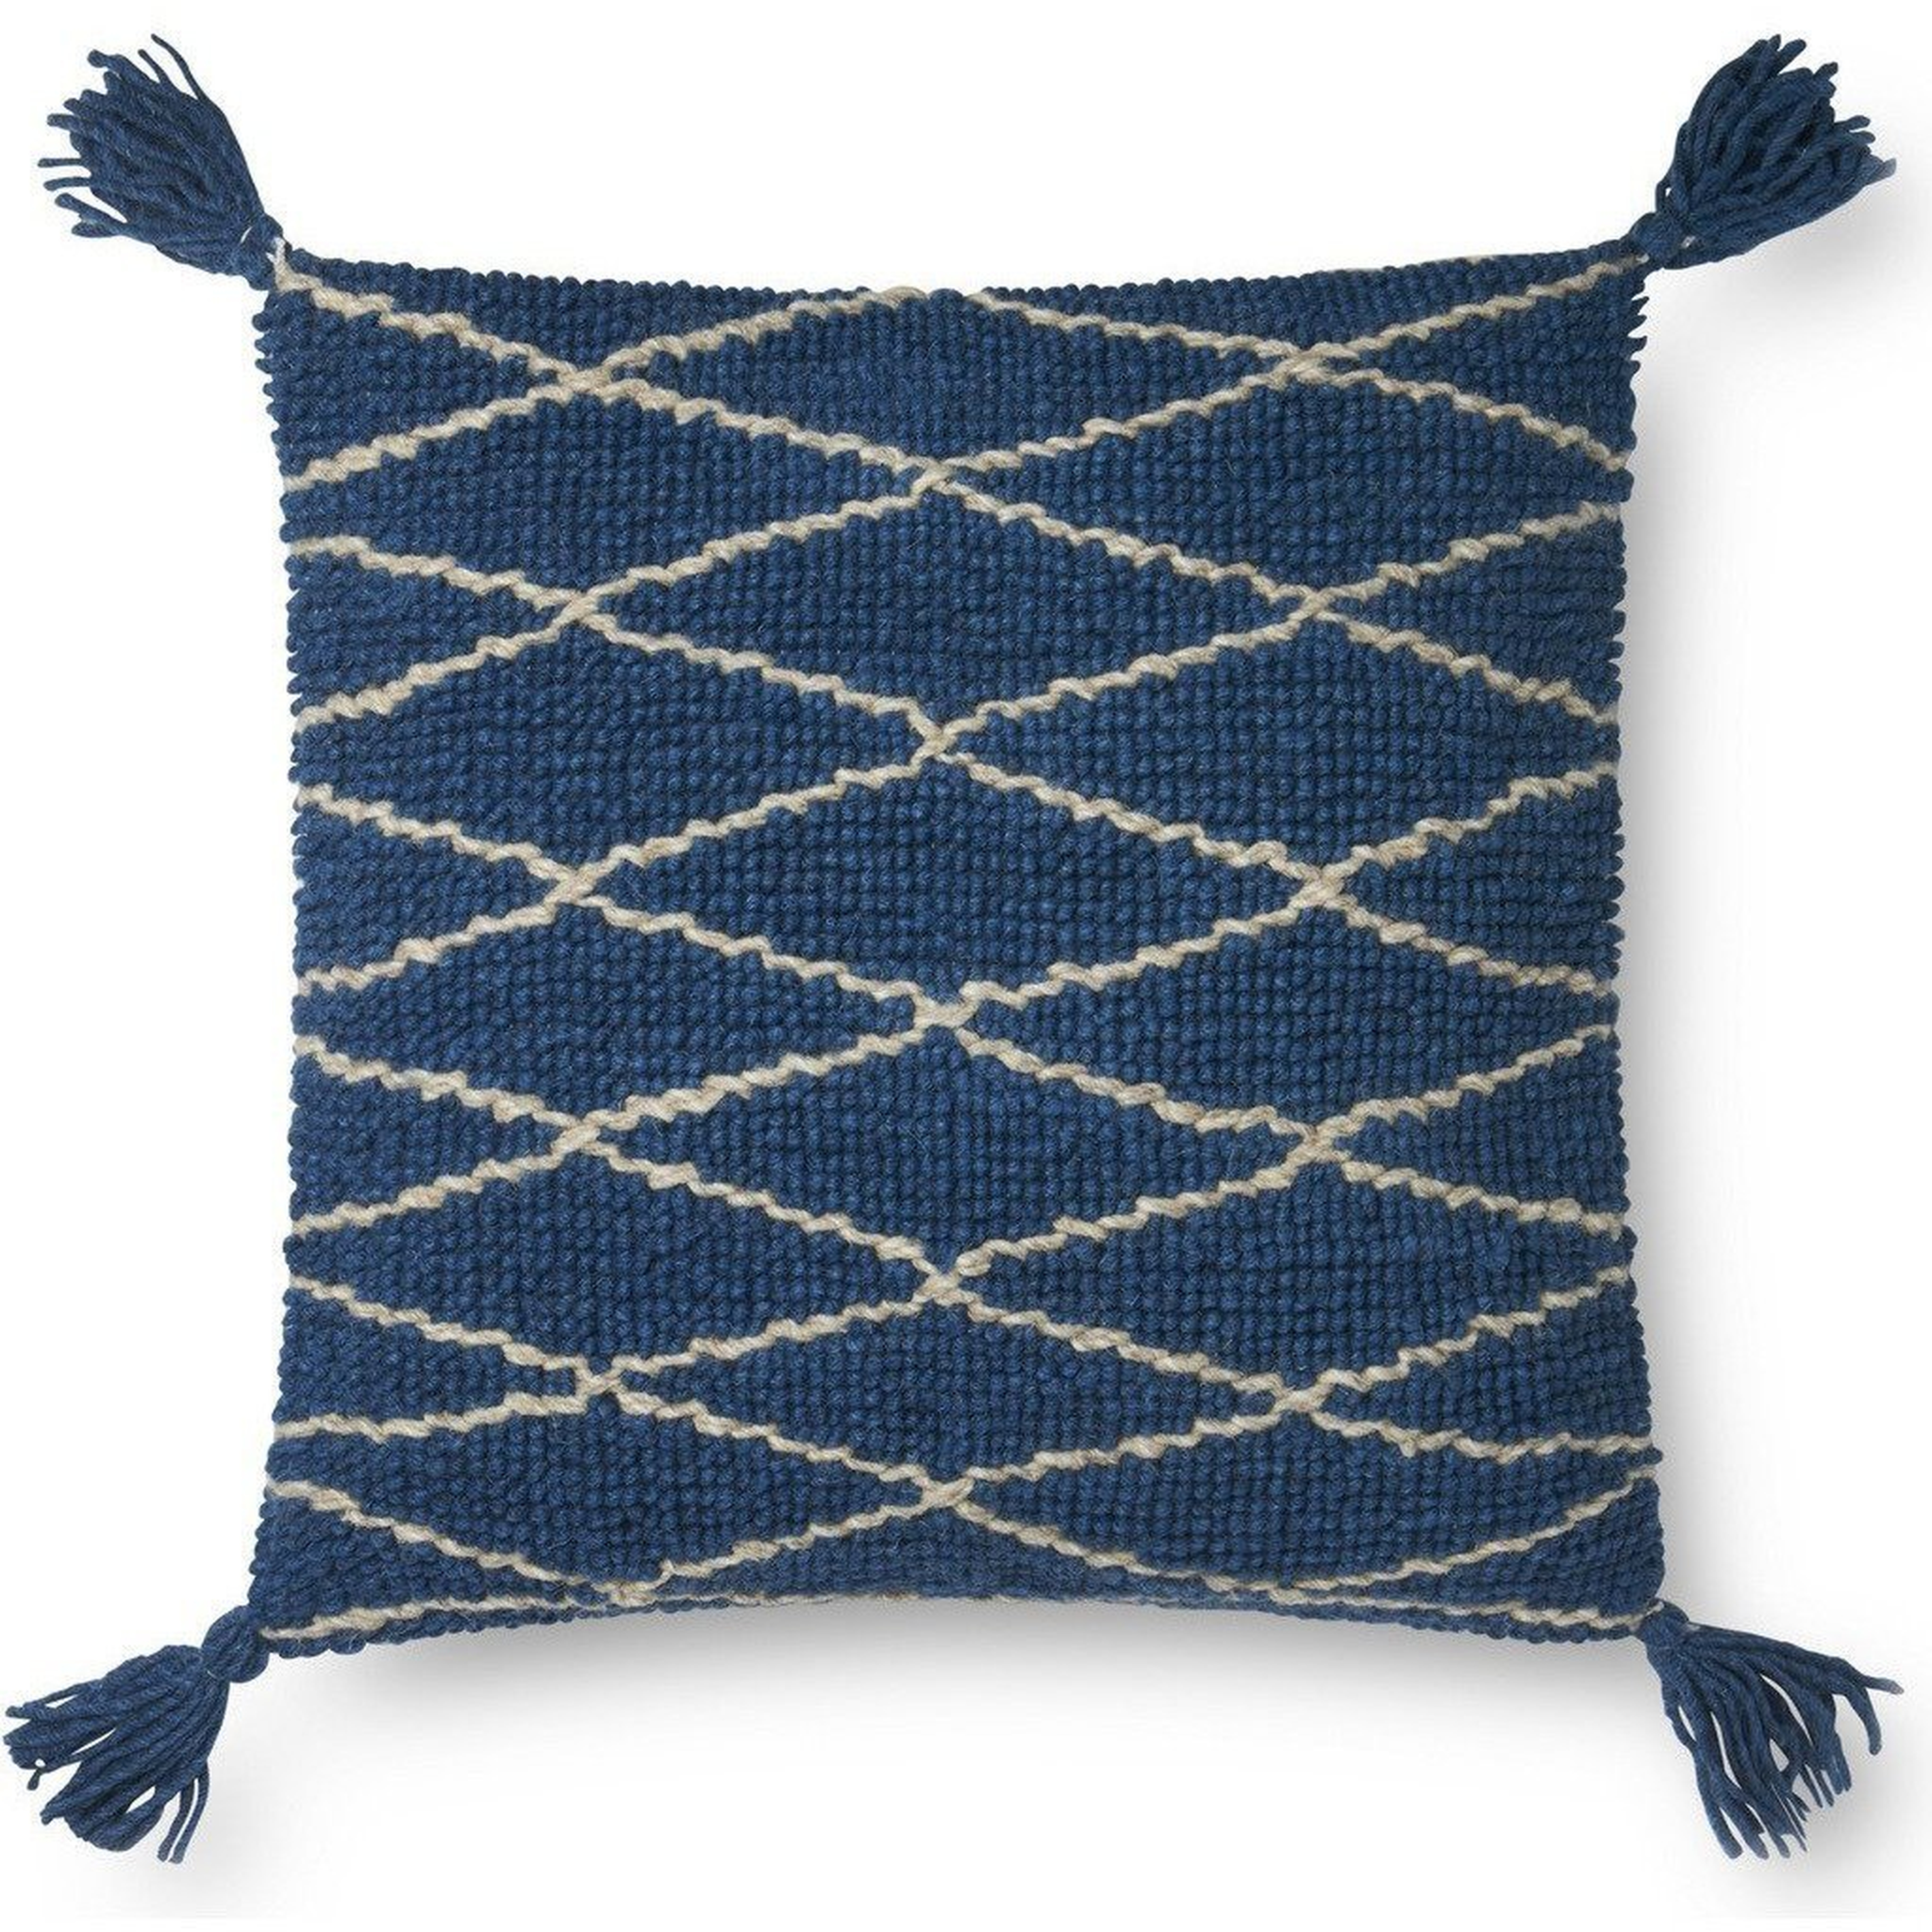 Cris-Cros Throw Pillow Cover with Tassels, 22" x 22", Blue - Loma Threads